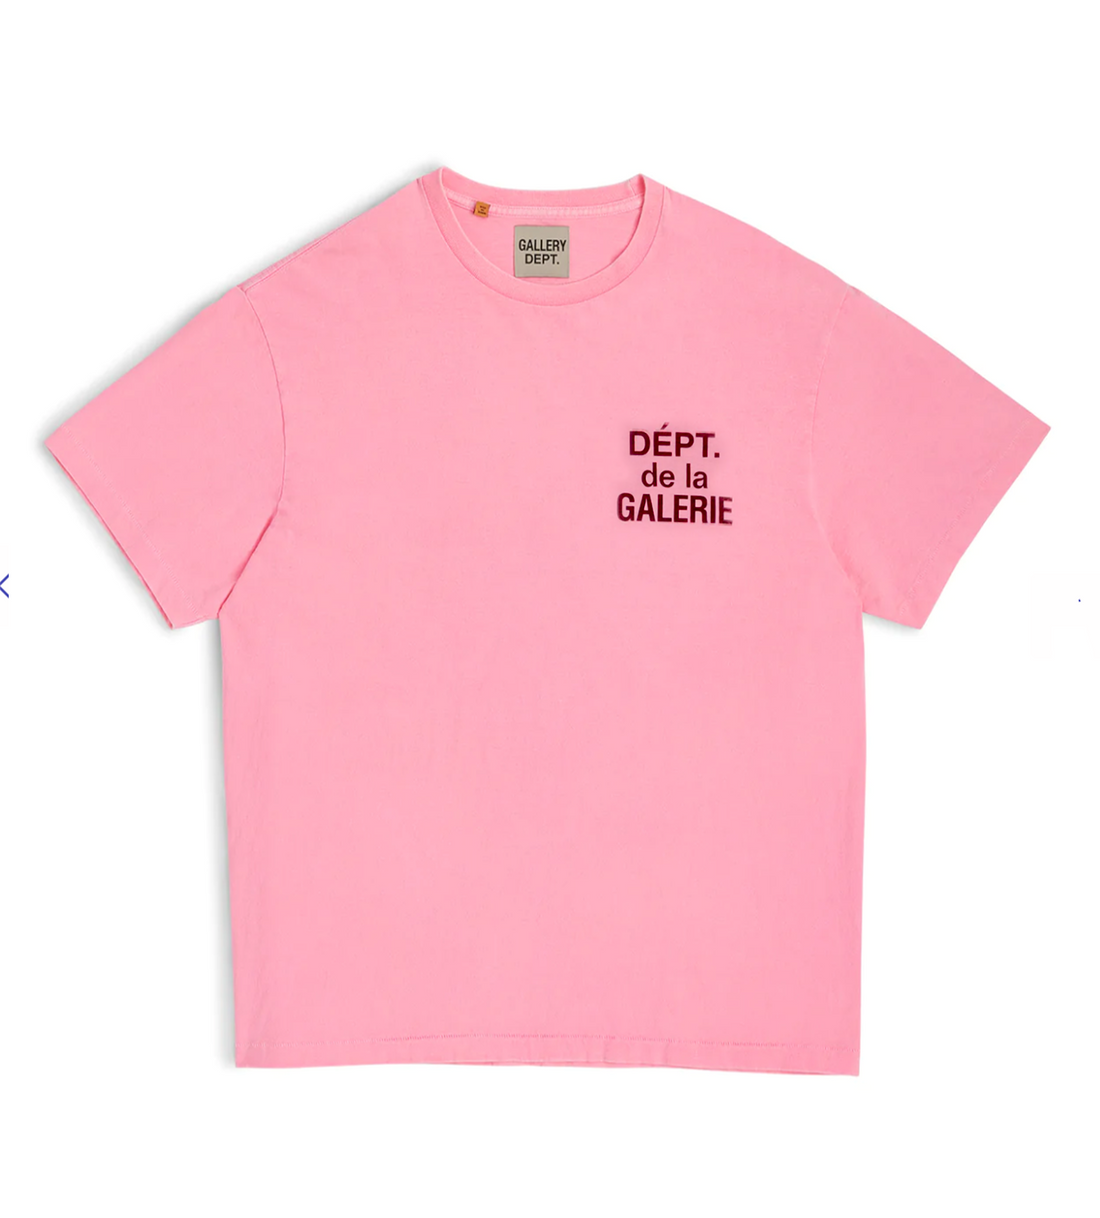 Gallery Dept. French Souvenir Flo Neon Pink Tee, Front View